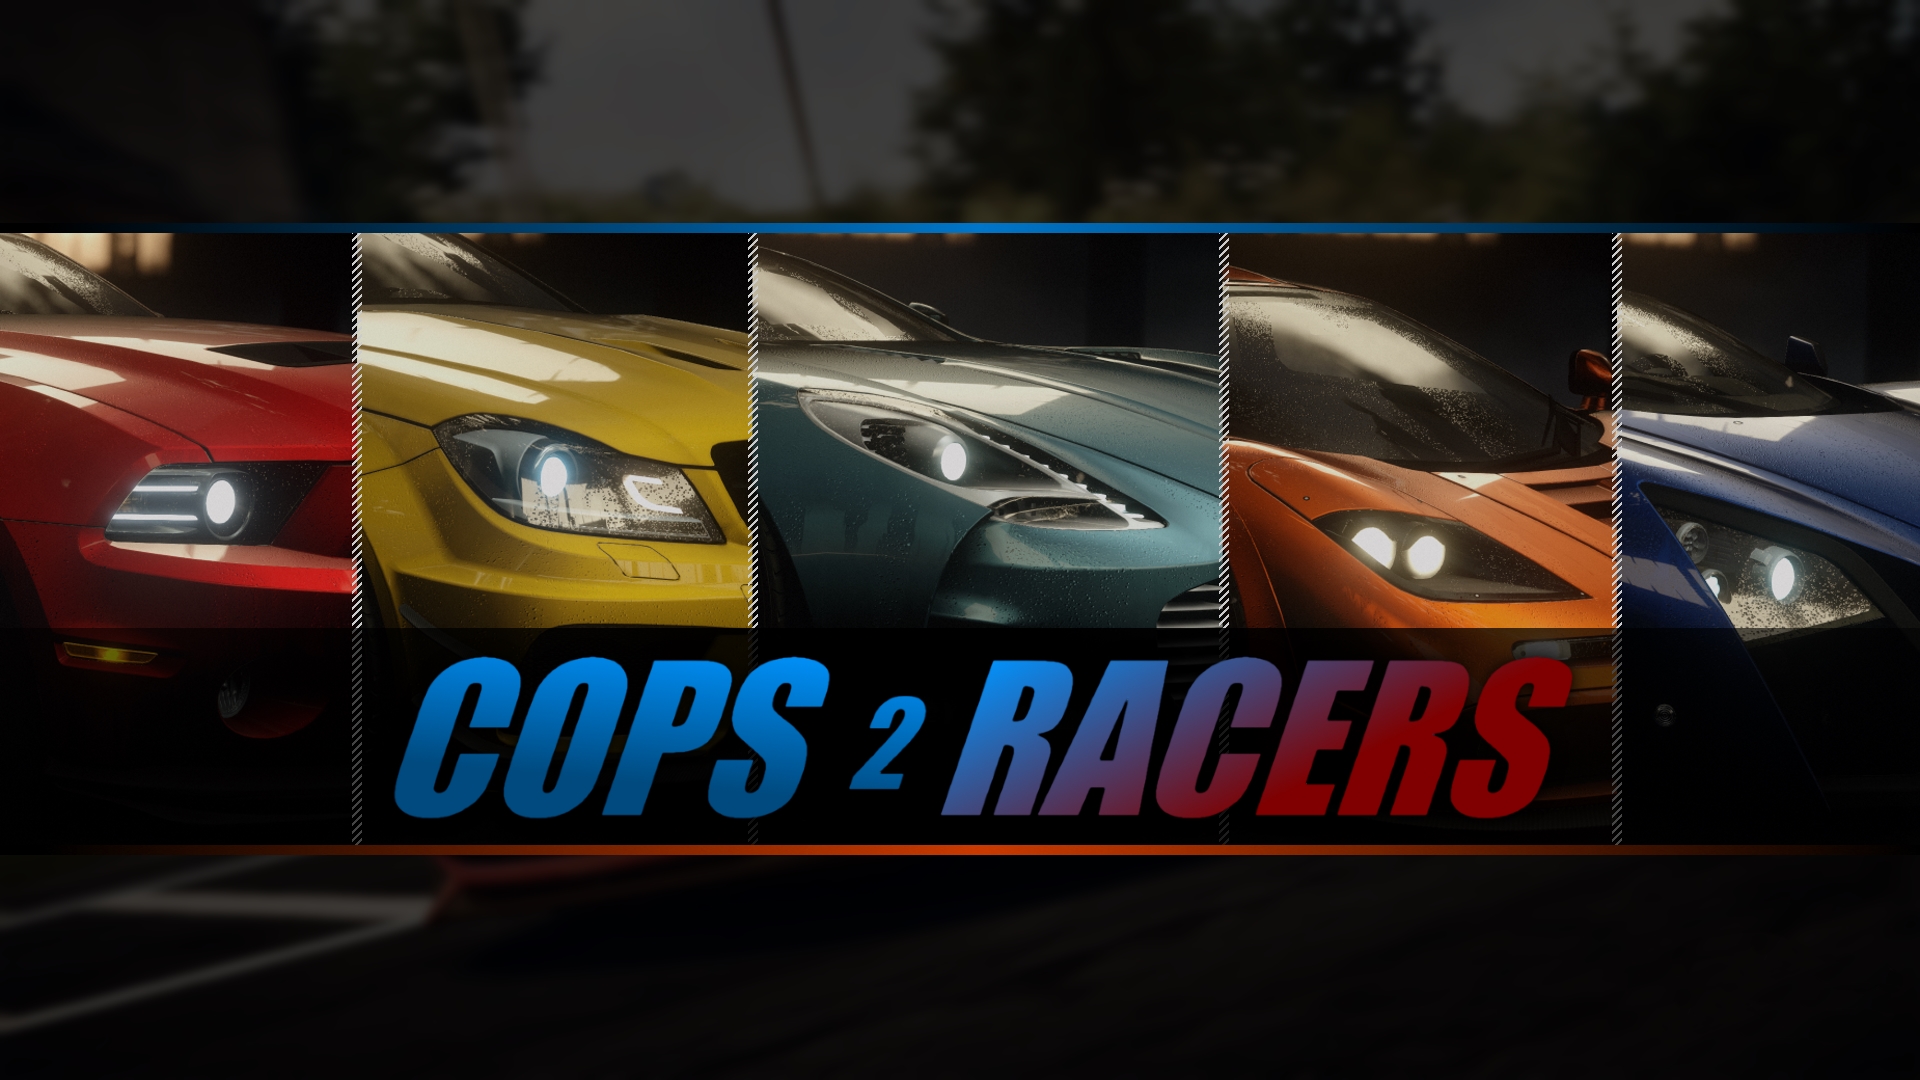 Need for Speed Rivals Undercover Cop Reveal